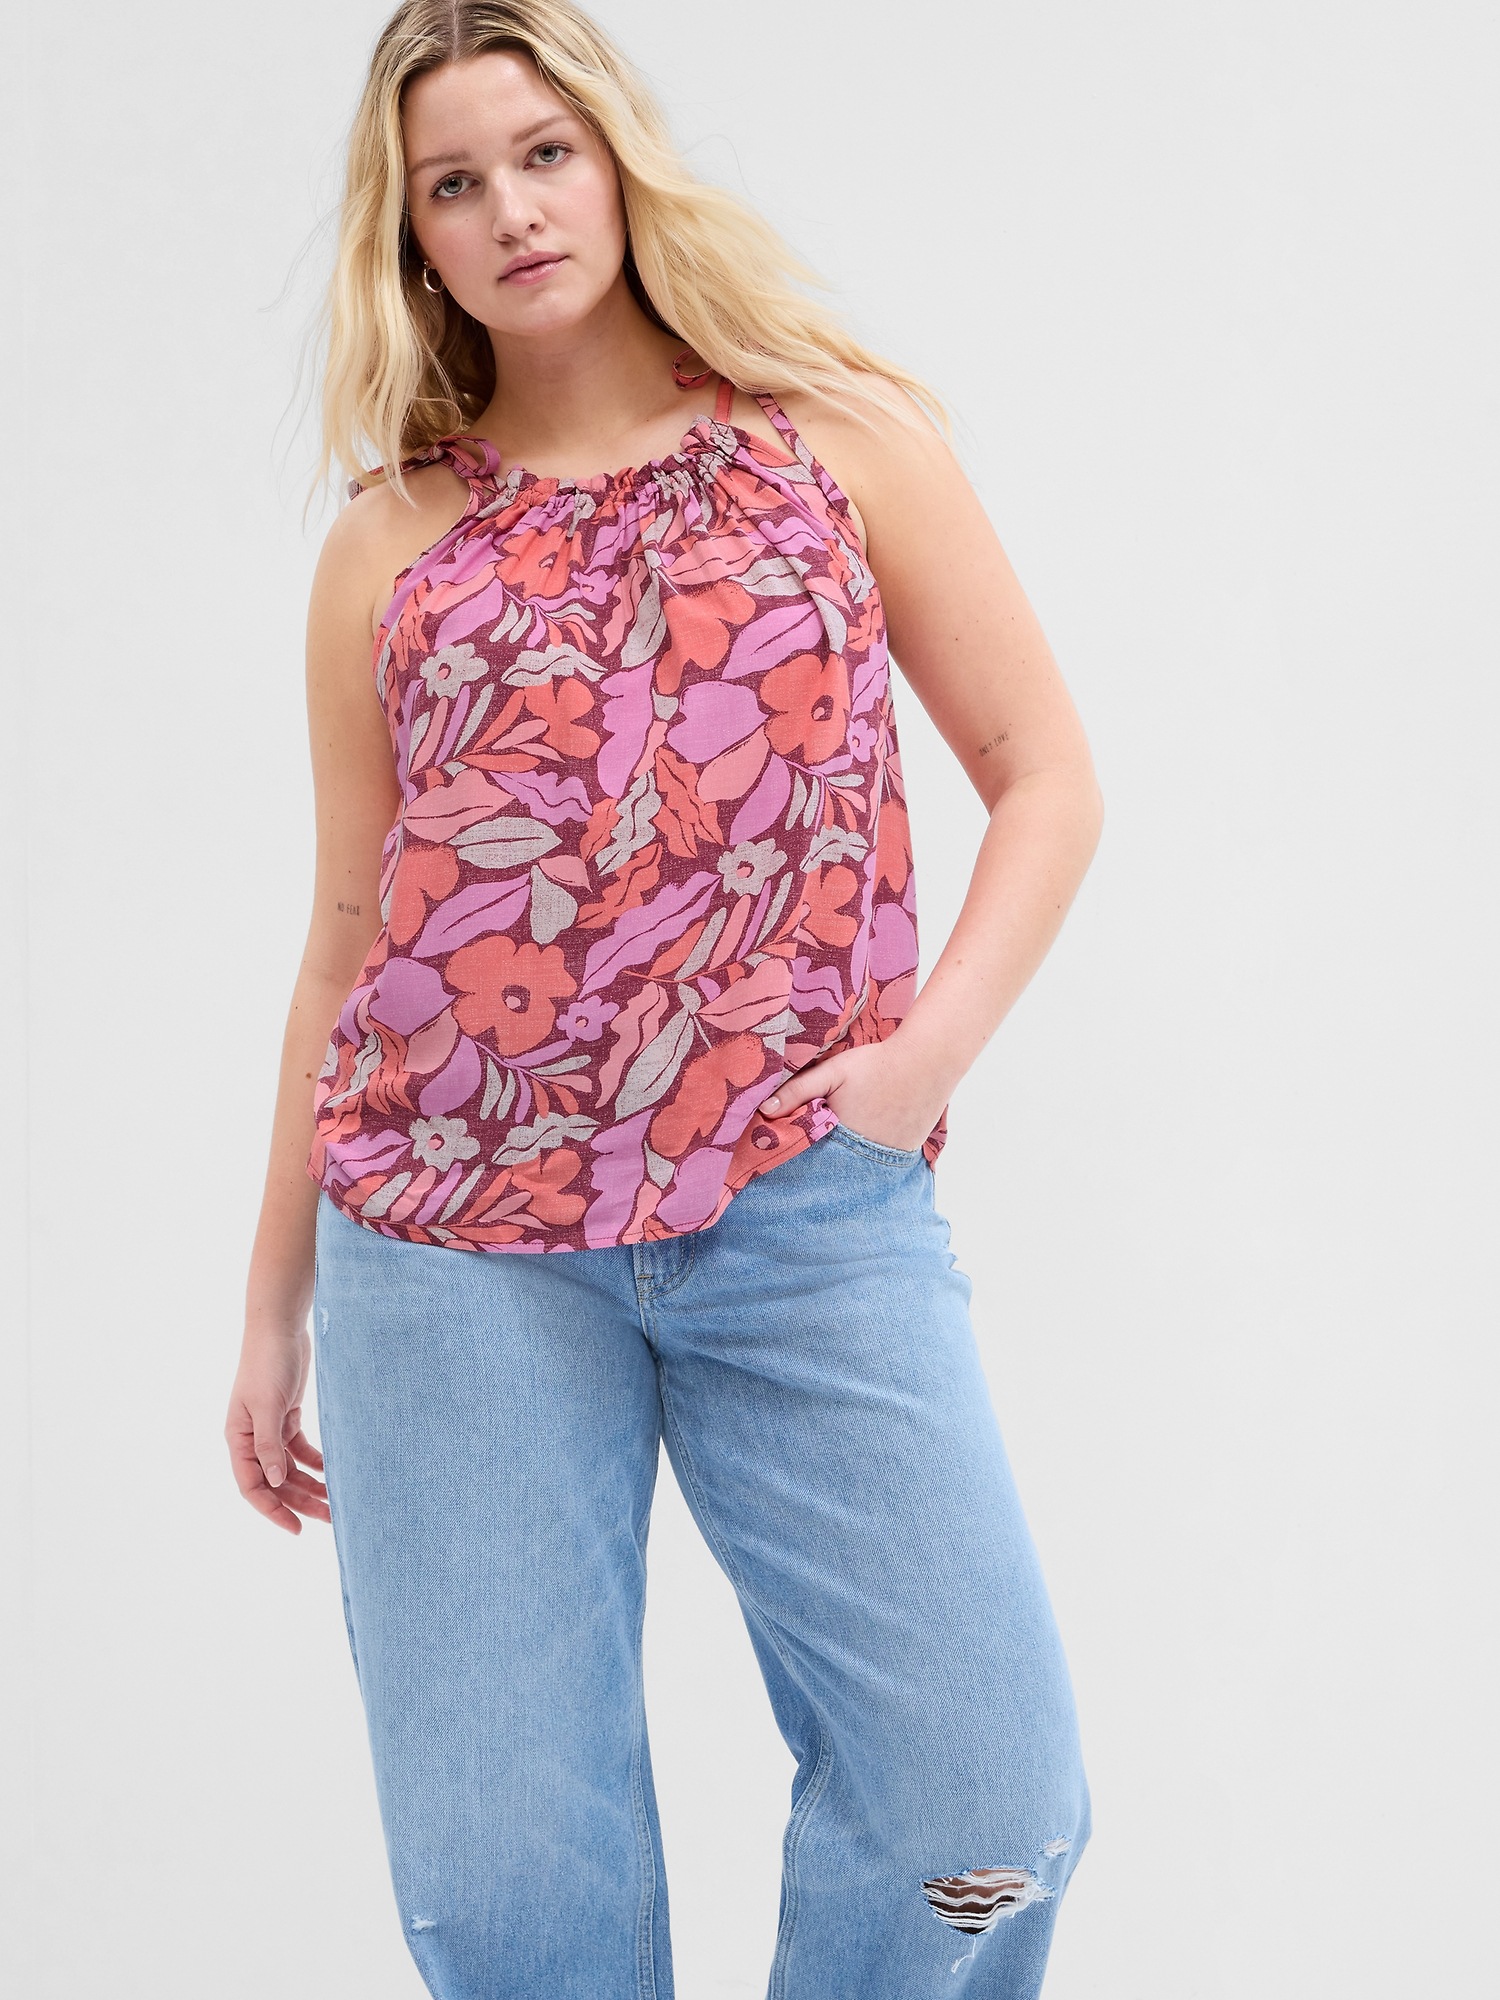 Relaxed Print Halter Top | Gap Factory